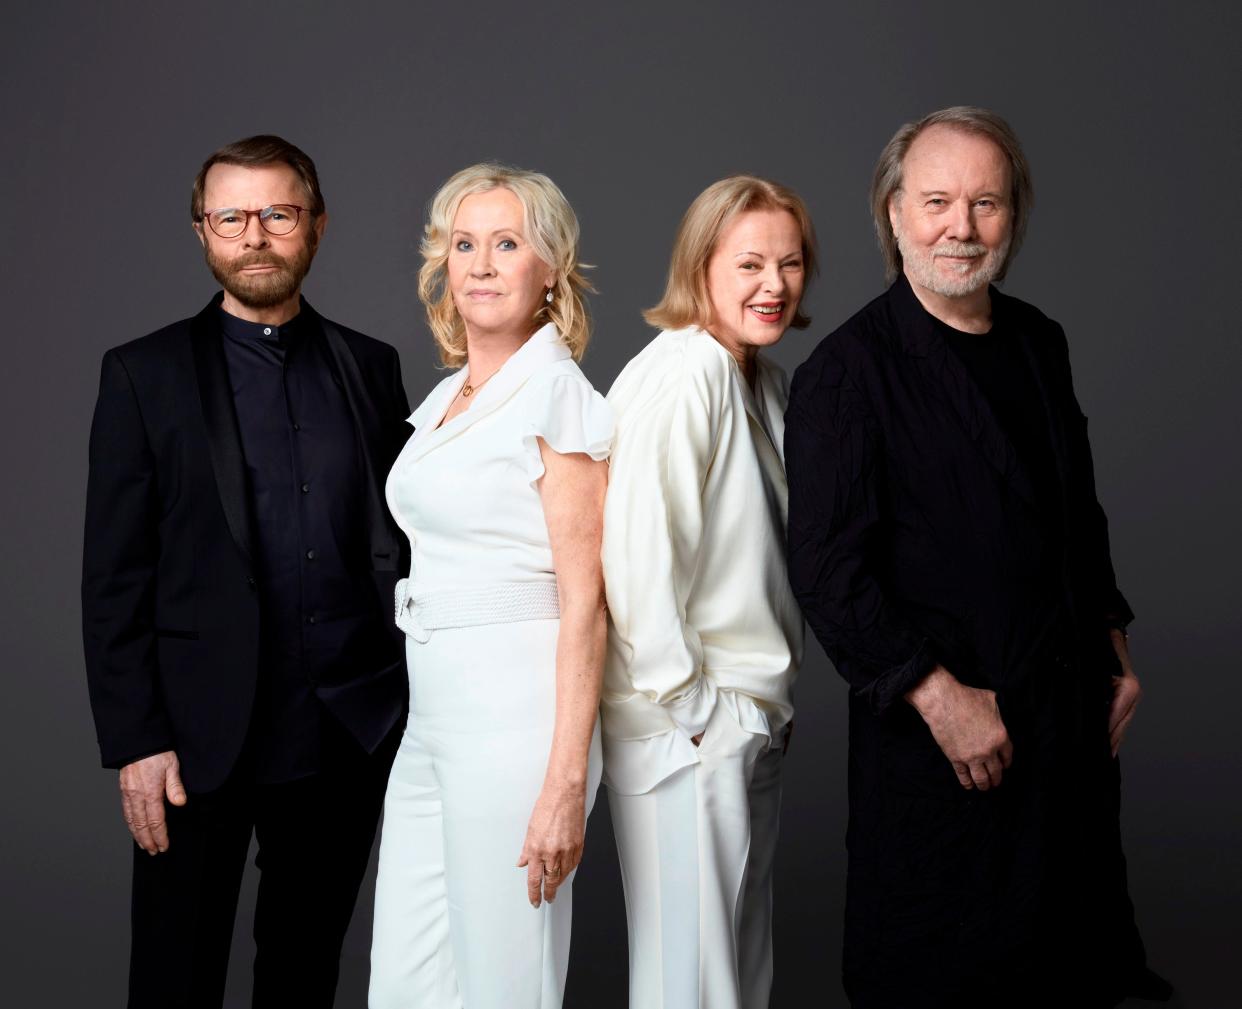 The original members of ABBA return for their ninth and final studio album, "Voyage."